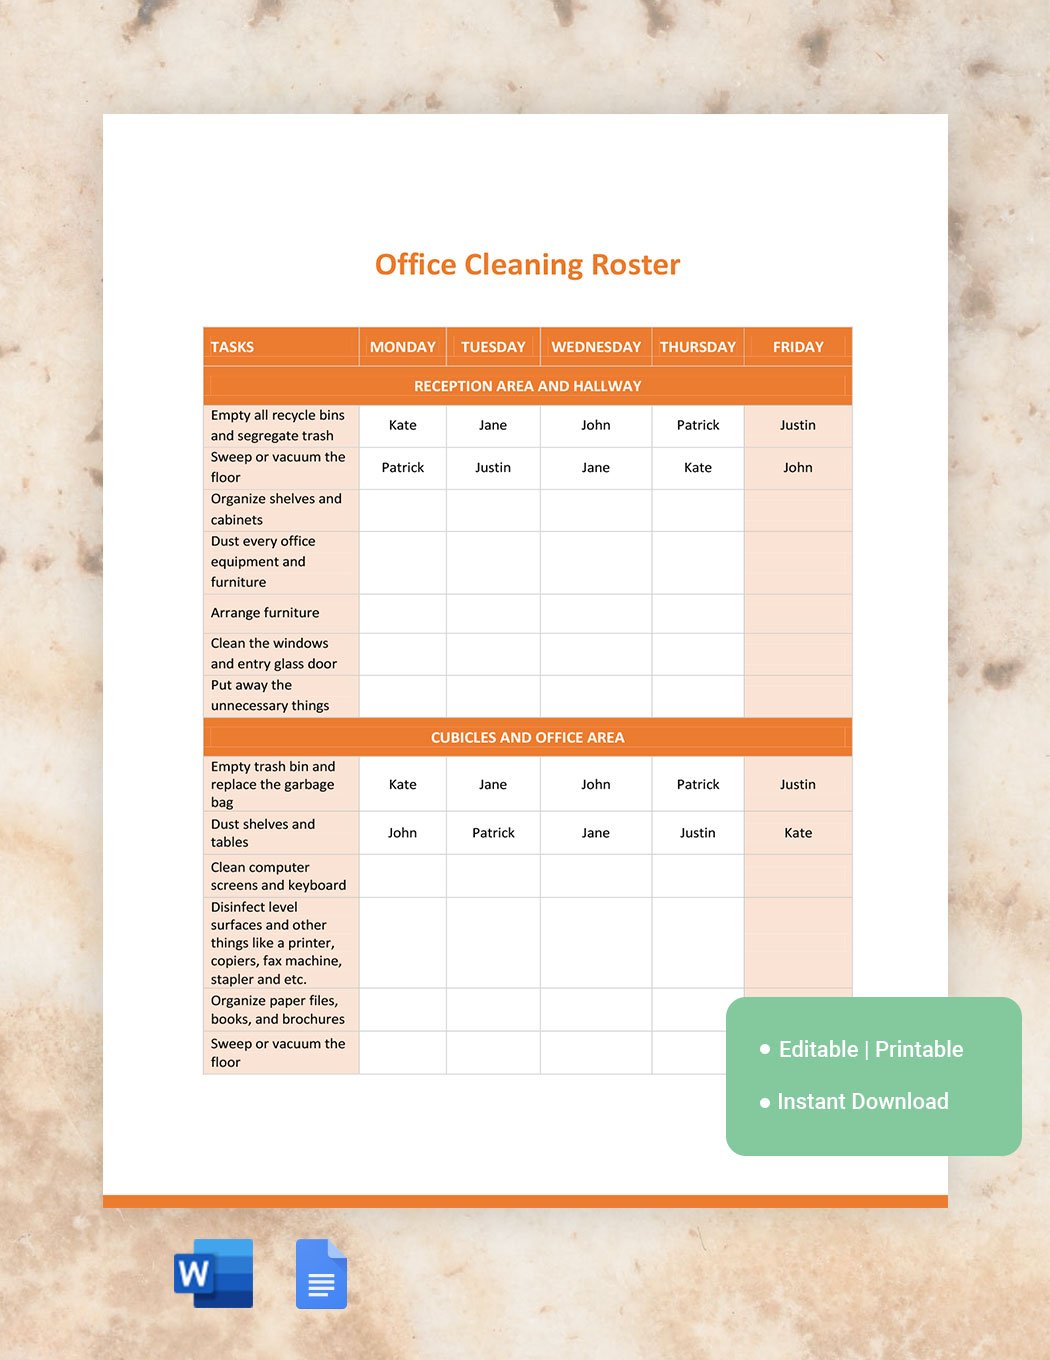 Office Cleaning Roster Template